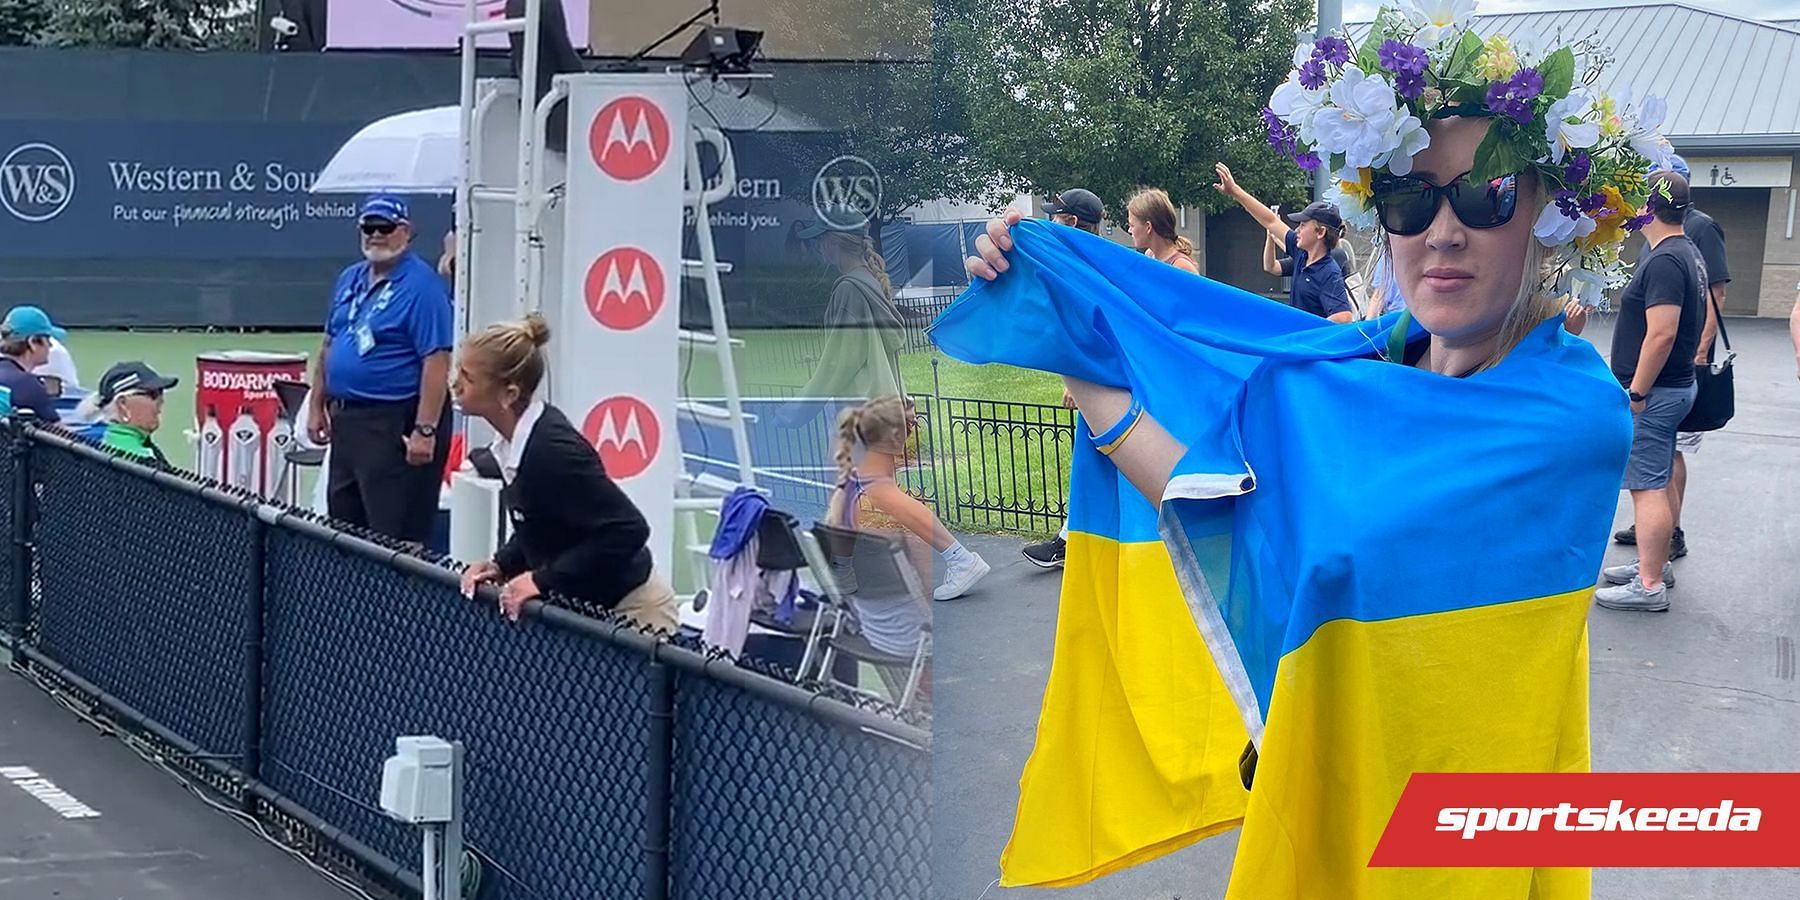 Lola (R) is the spectator with the Ukraine flag who was ousted from the venue